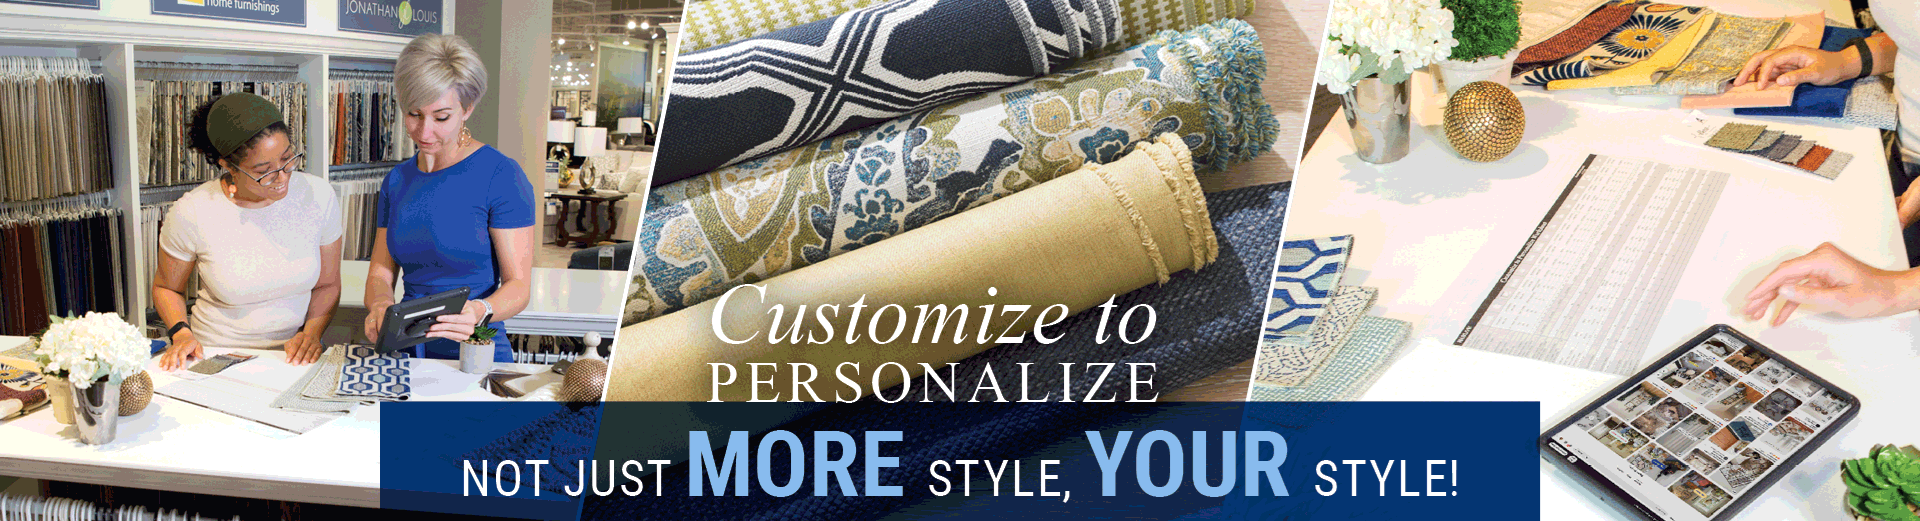 Customize to Personalize.  Not Just MORE Style, YOUR Style